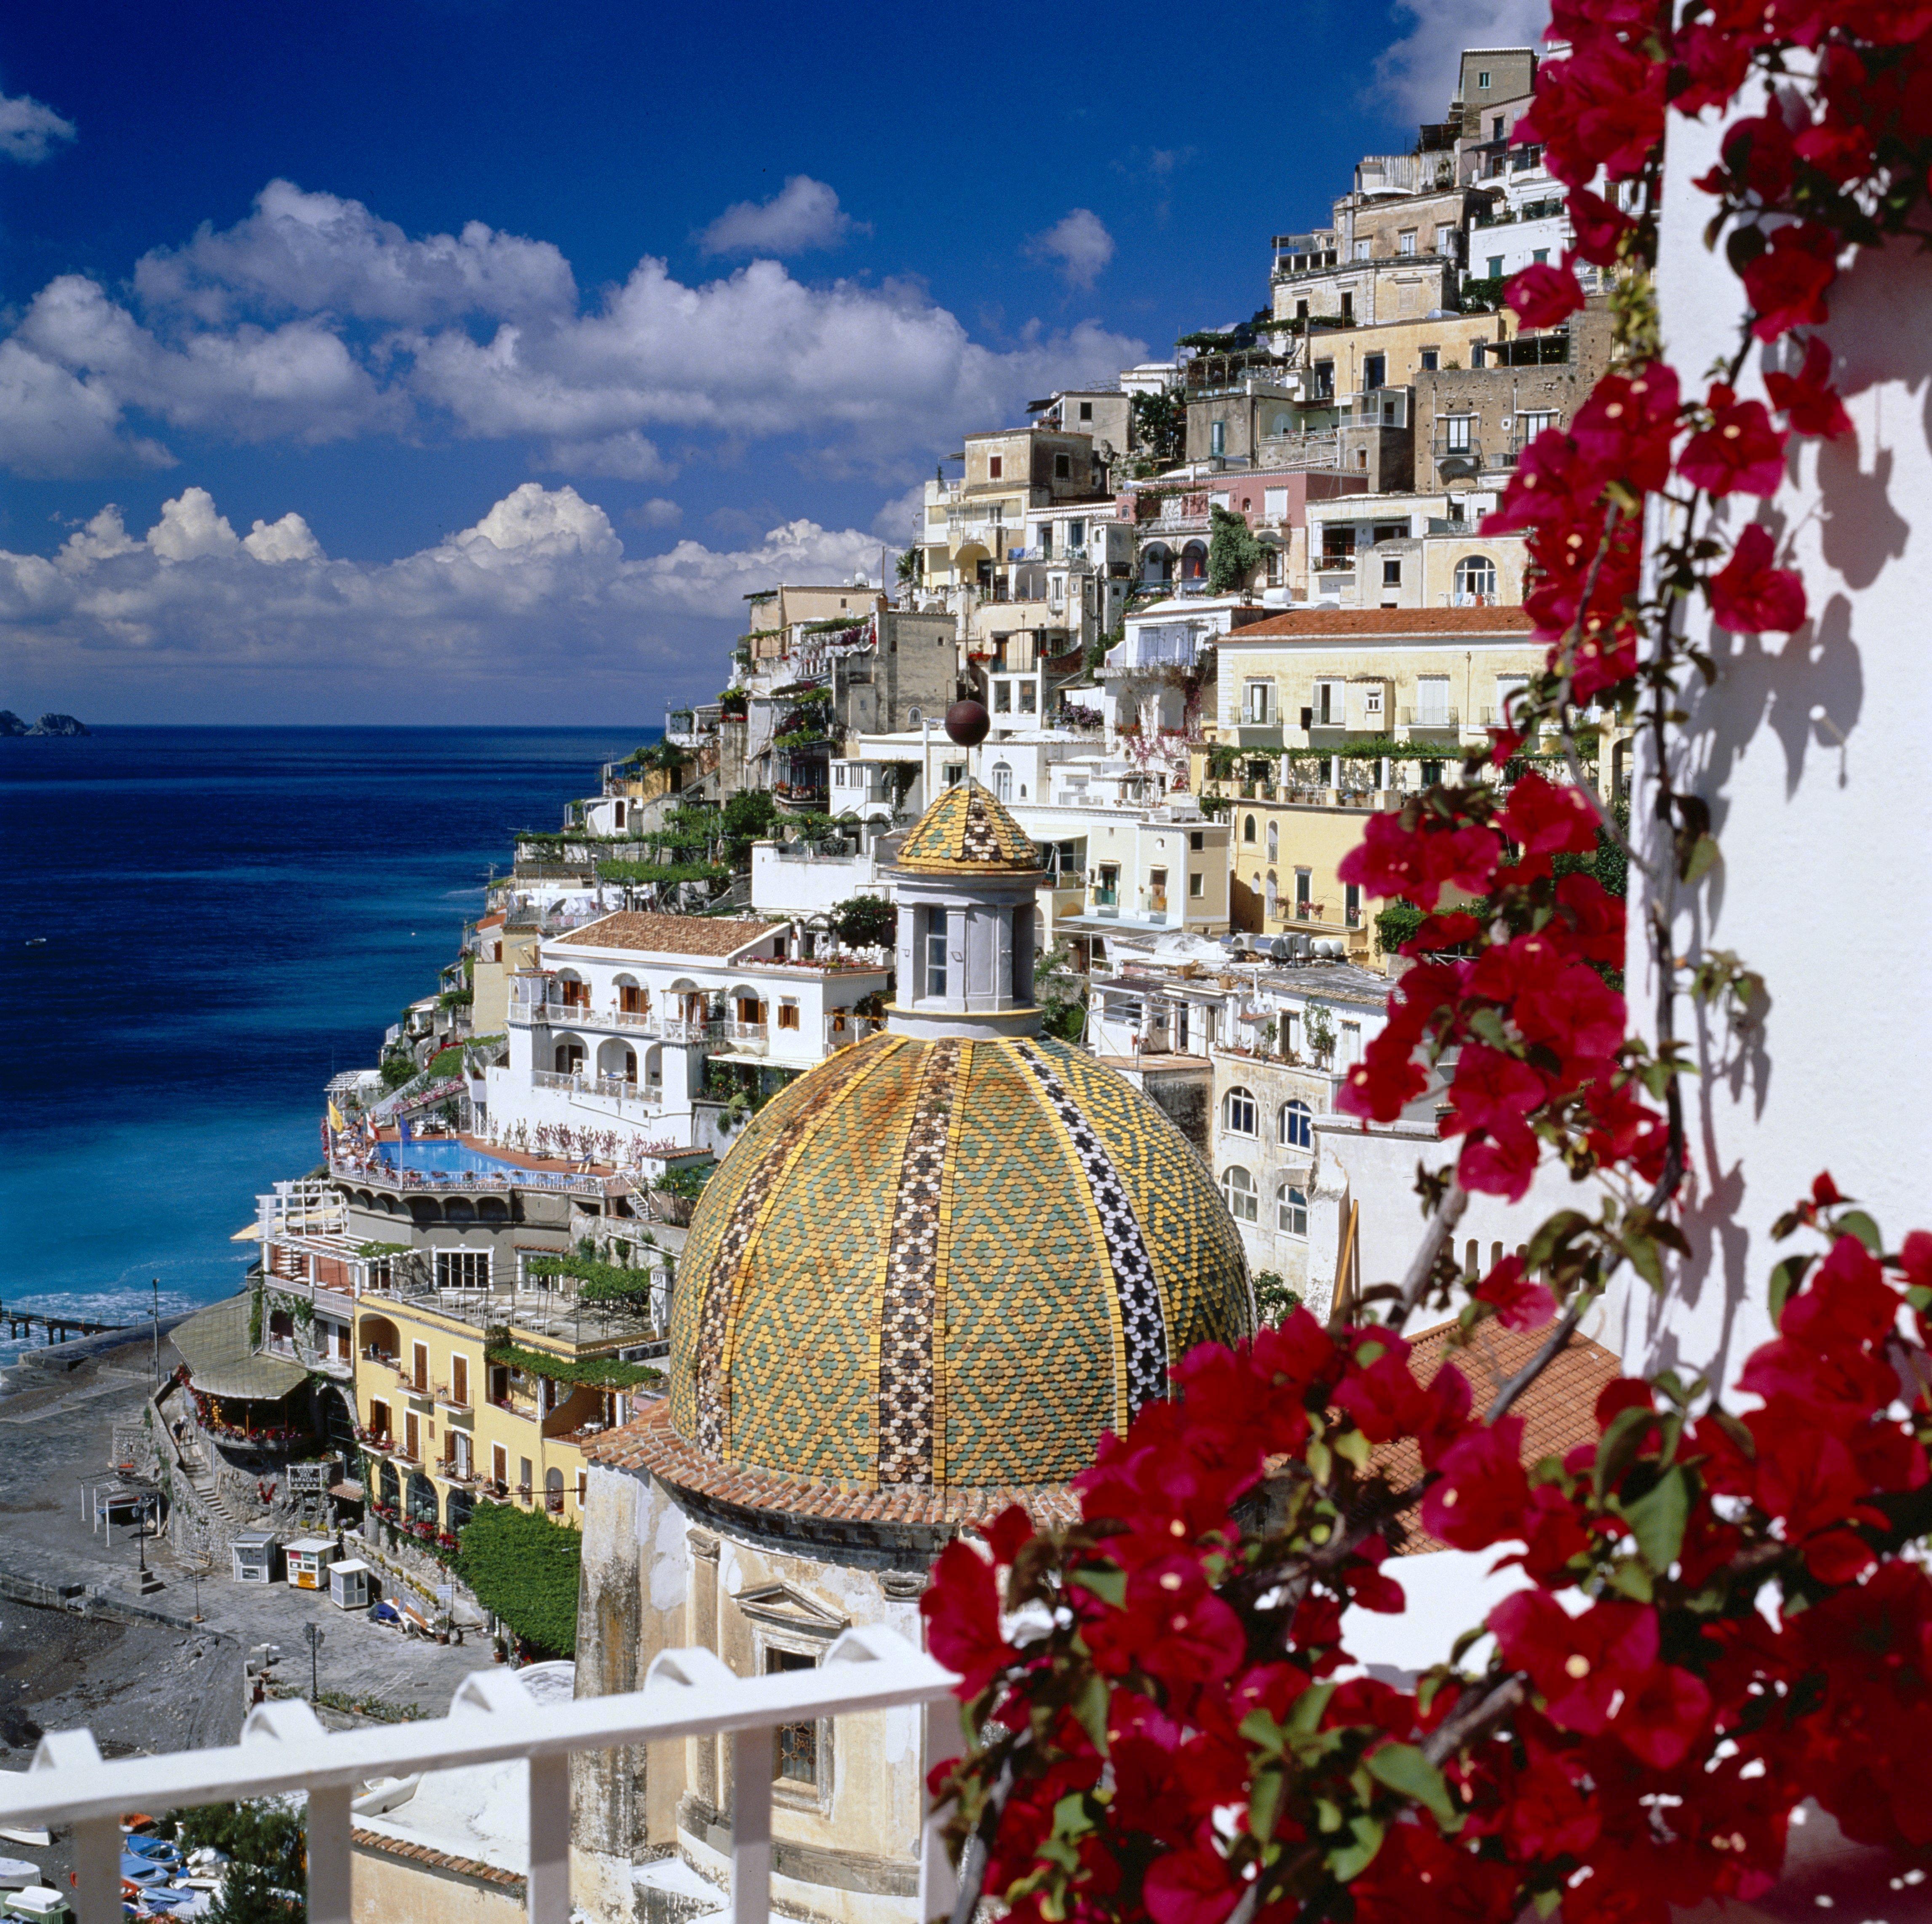 Mandatory Credit: THE TRAVEL LIBRARY / Rex Features Ltd. VIEW OF TOWN WITH CHURCH DOME POSITANO, ITALY RED FLOWER FLOWERS STEEP HILL HILLSIDE